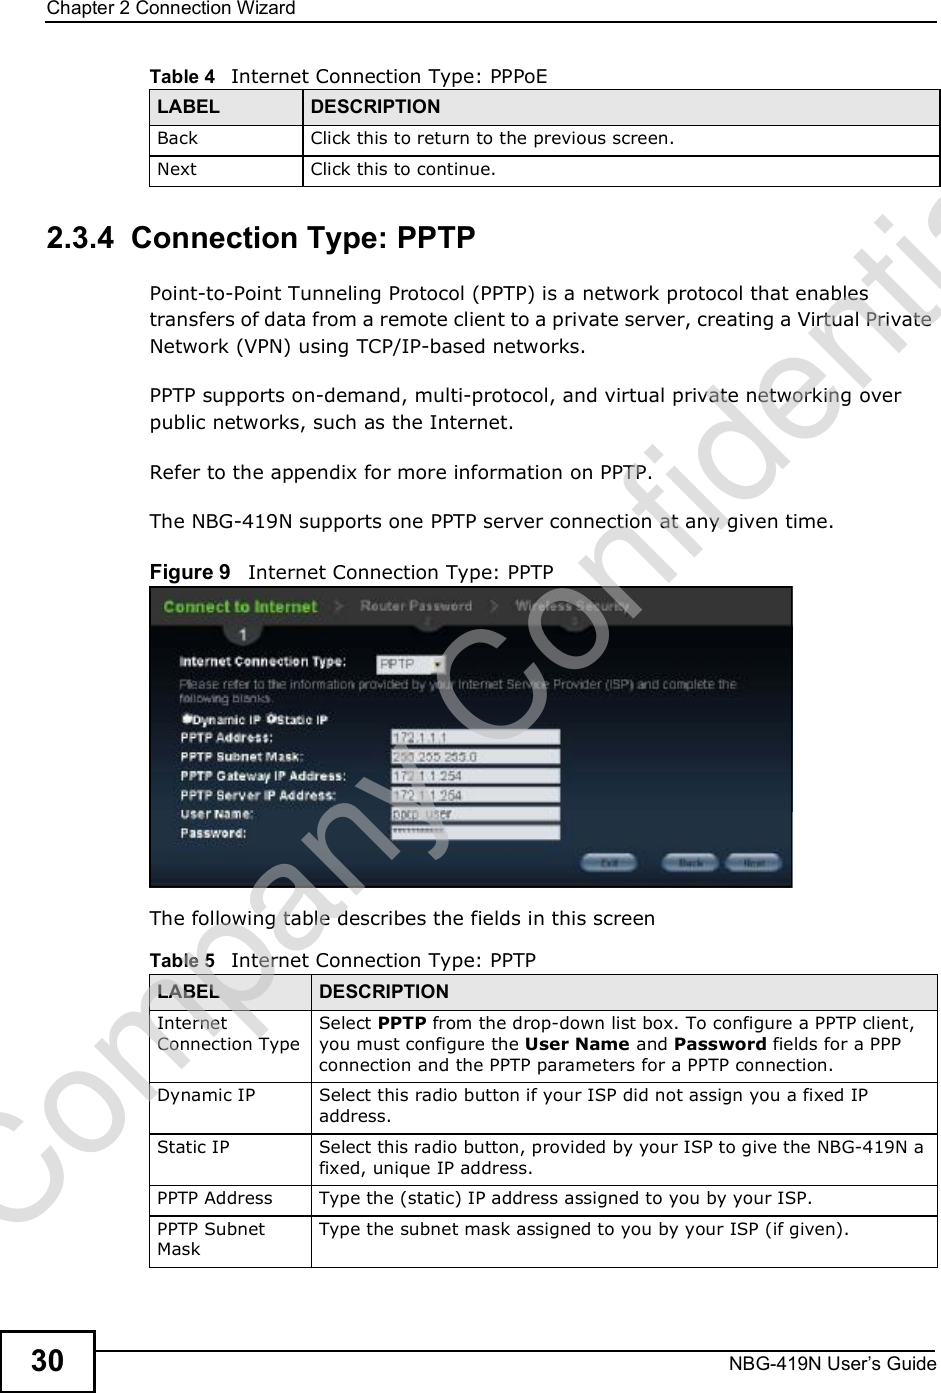 Chapter 2Connection WizardNBG-419N User s Guide302.3.4  Connection Type: PPTPPoint-to-Point Tunneling Protocol (PPTP) is a network protocol that enables transfers of data from a remote client to a private server, creating a Virtual Private Network (VPN) using TCP/IP-based networks.PPTP supports on-demand, multi-protocol, and virtual private networking over public networks, such as the Internet.Refer to the appendix for more information on PPTP.The NBG-419N supports one PPTP server connection at any given time.Figure 9   Internet Connection Type: PPTP The following table describes the fields in this screenBack Click this to return to the previous screen.Next Click this to continue. Table 4   Internet Connection Type: PPPoELABEL DESCRIPTIONTable 5   Internet Connection Type: PPTPLABEL DESCRIPTIONInternet Connection TypeSelect PPTP from the drop-down list box. To configure a PPTP client, you must configure the User Name and Password fields for a PPP connection and the PPTP parameters for a PPTP connection.Dynamic IP Select this radio button if your ISP did not assign you a fixed IP address.Static IP Select this radio button, provided by your ISP to give the NBG-419N a fixed, unique IP address.PPTP Address Type the (static) IP address assigned to you by your ISP.PPTP Subnet MaskType the subnet mask assigned to you by your ISP (if given).Company Confidential